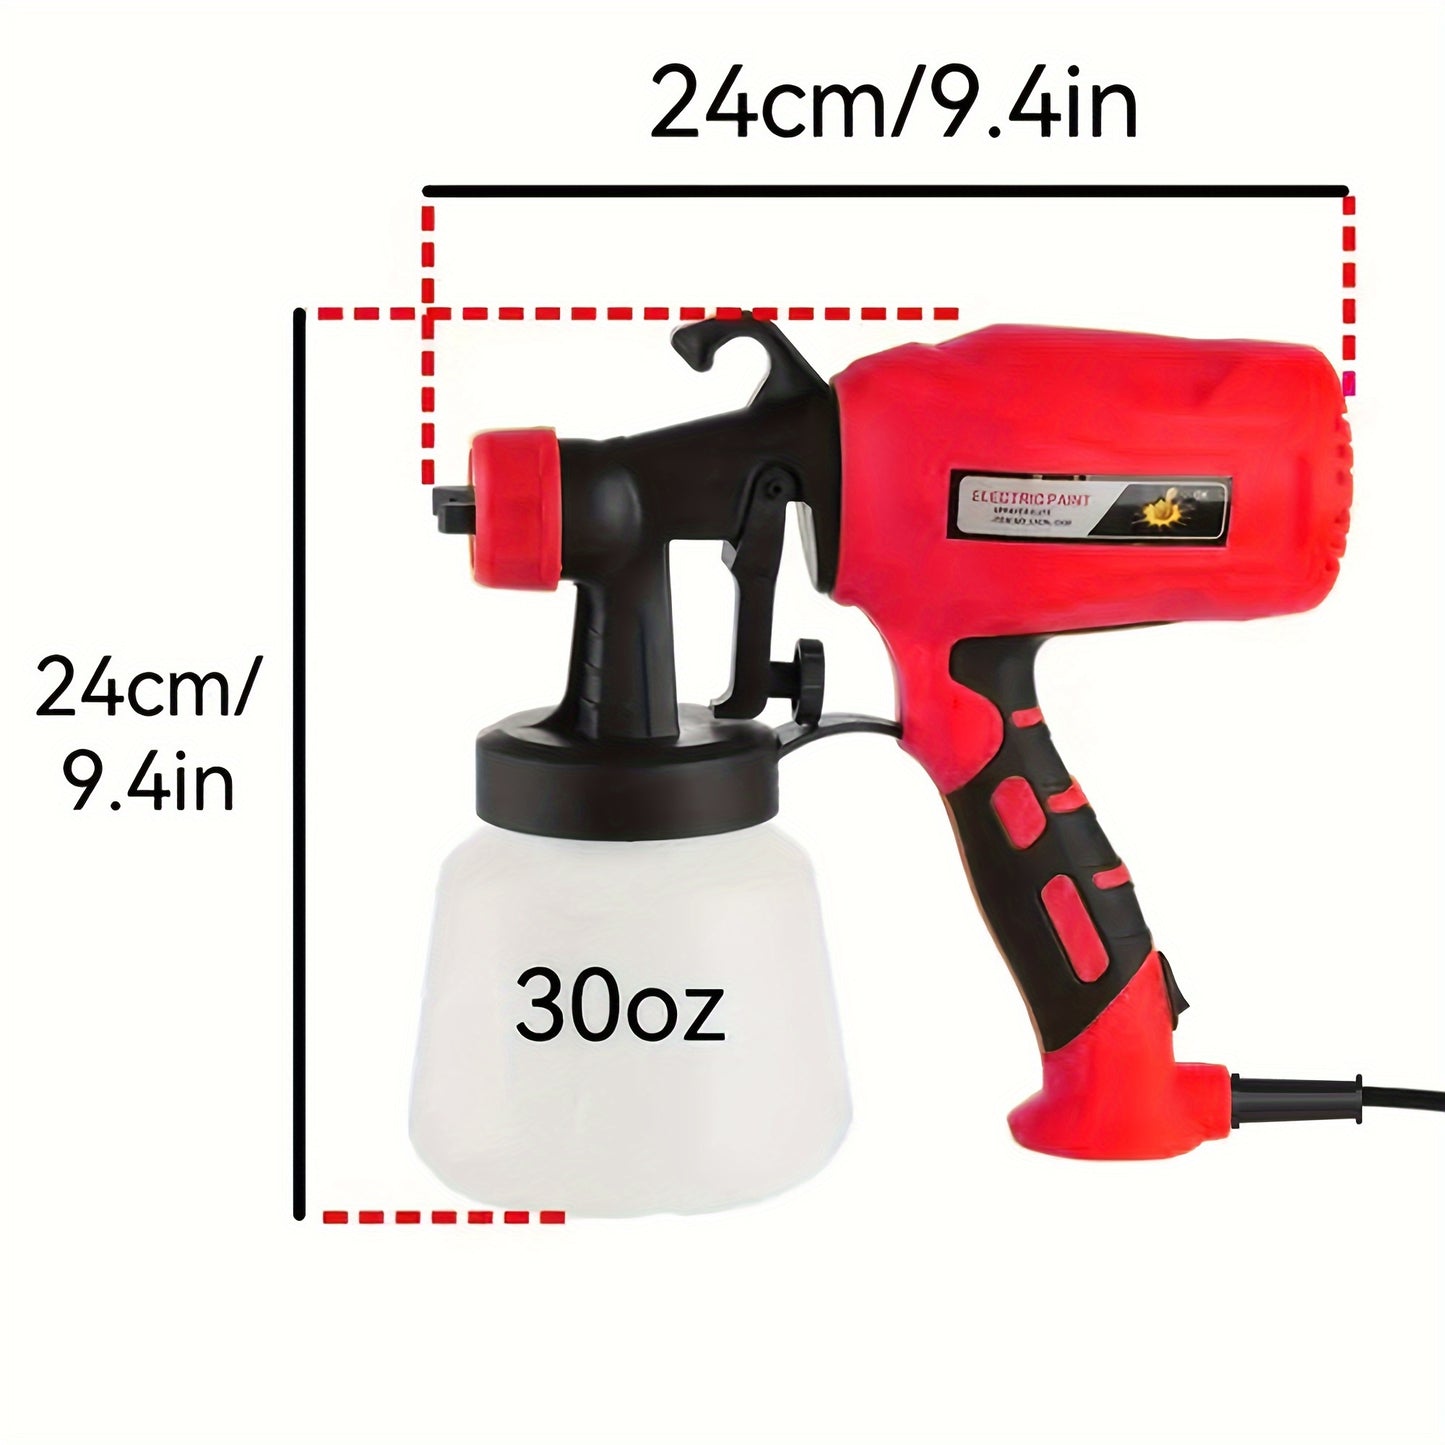 1pc Paint Sprayer, HVLP Spray Gun With Cleaning & Blowing Joints, 2 Nozzles, Easy To Clean, For Furniture, Cabinets, Fence, Walls, Door, Garden Chairs